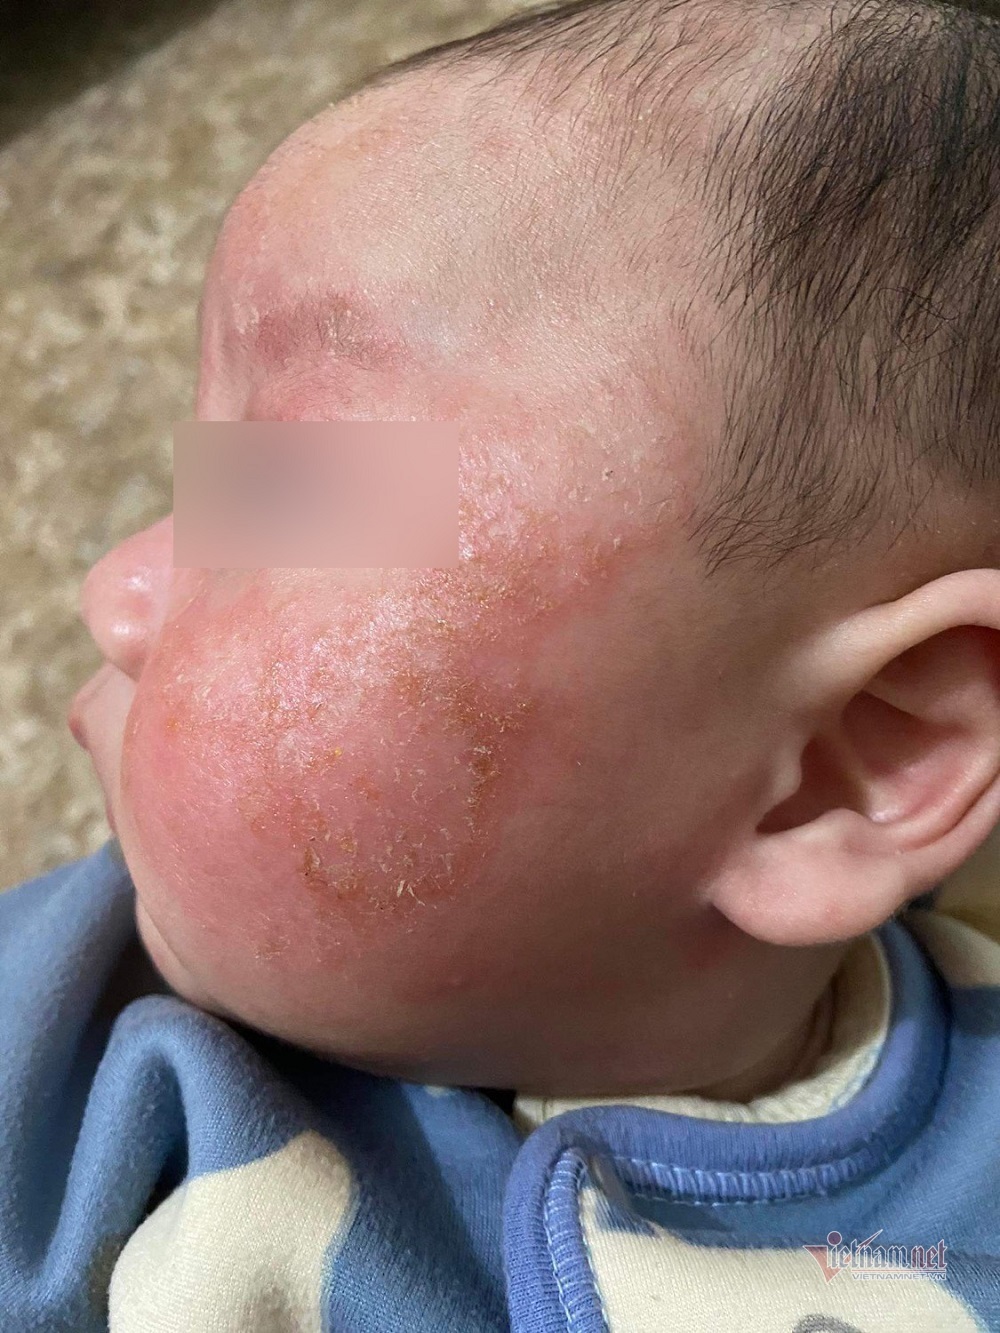 Abstain from bathing for 6 days when infected with Covid-19, young skin is scaly, red